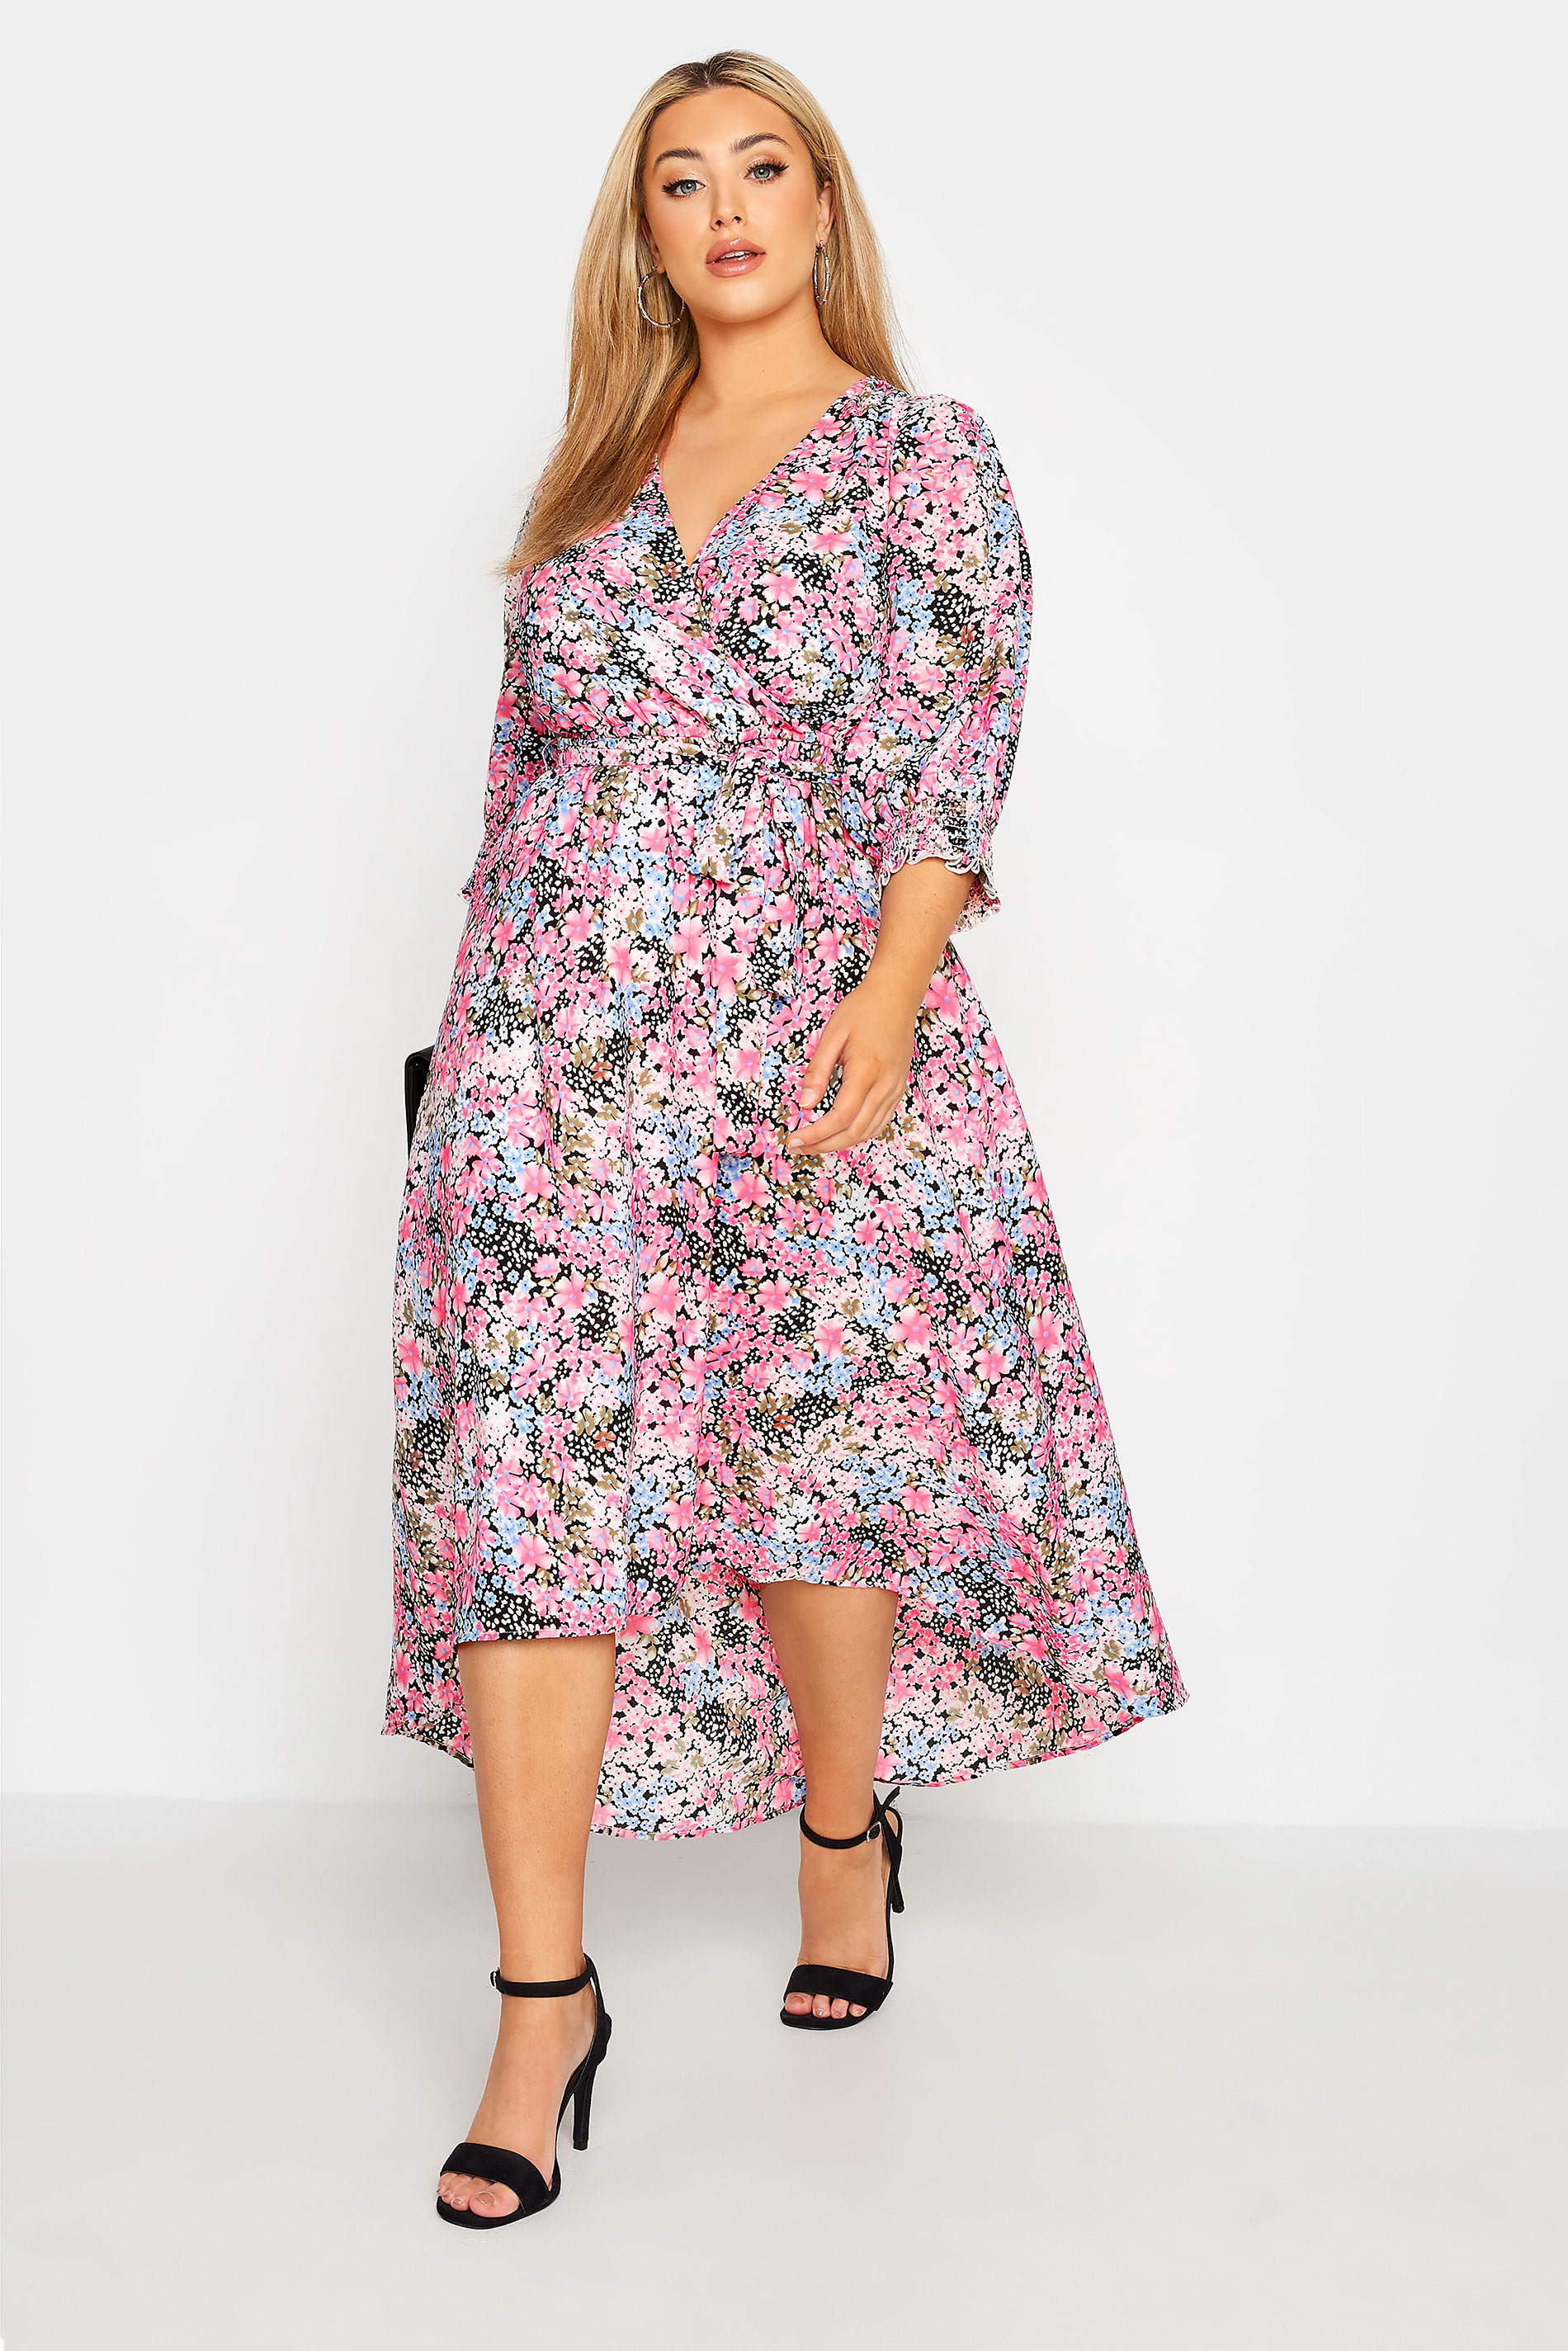 Robes Grande Taille Grande taille  Robes Portefeuilles | YOURS LONDON - Robe Rose Clair Floral Ourlet Plongeant - SE87231